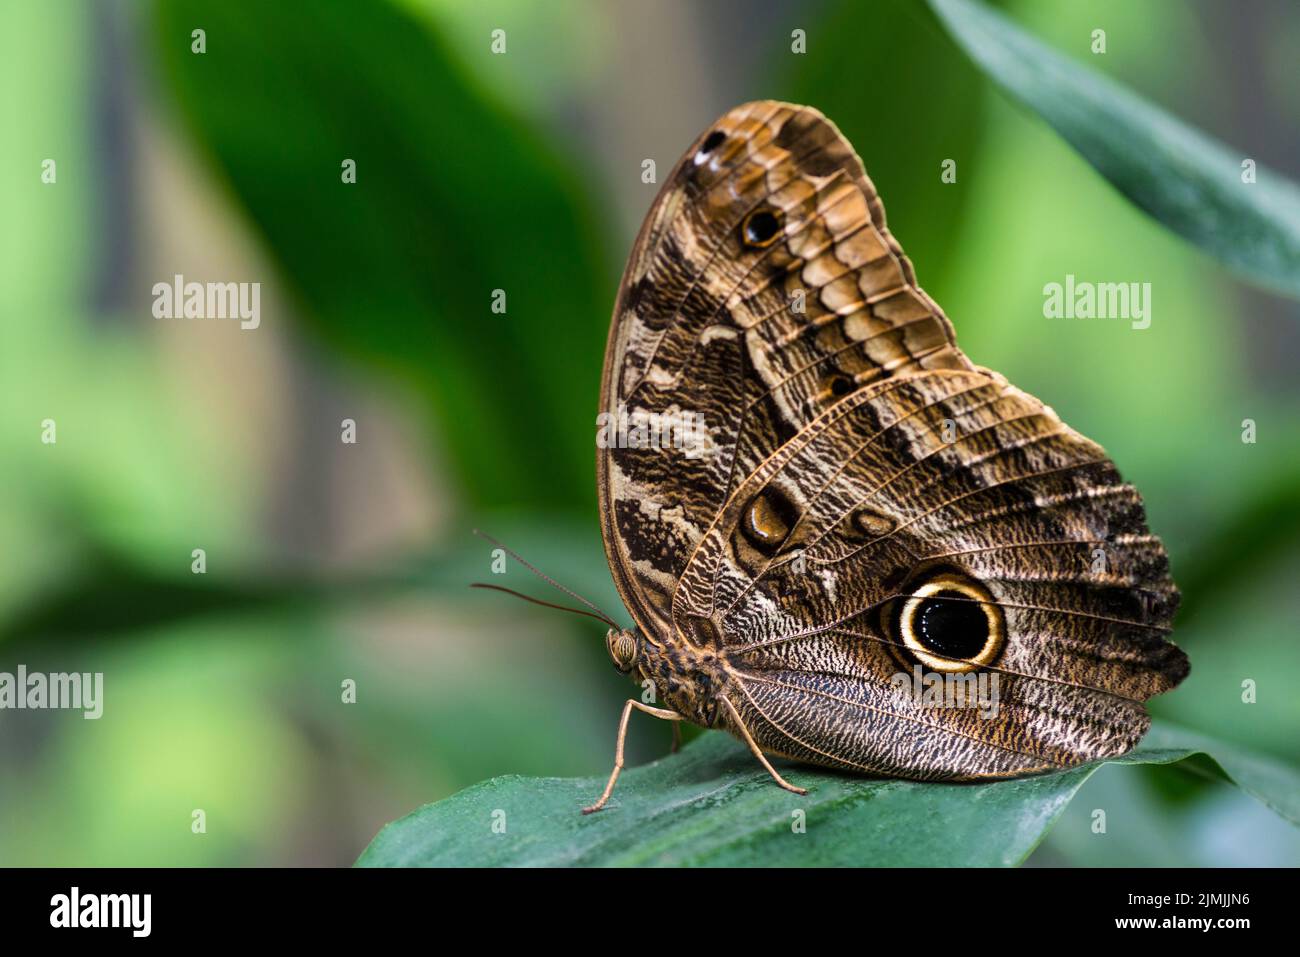 Owl butterfly with blurry background Stock Photo